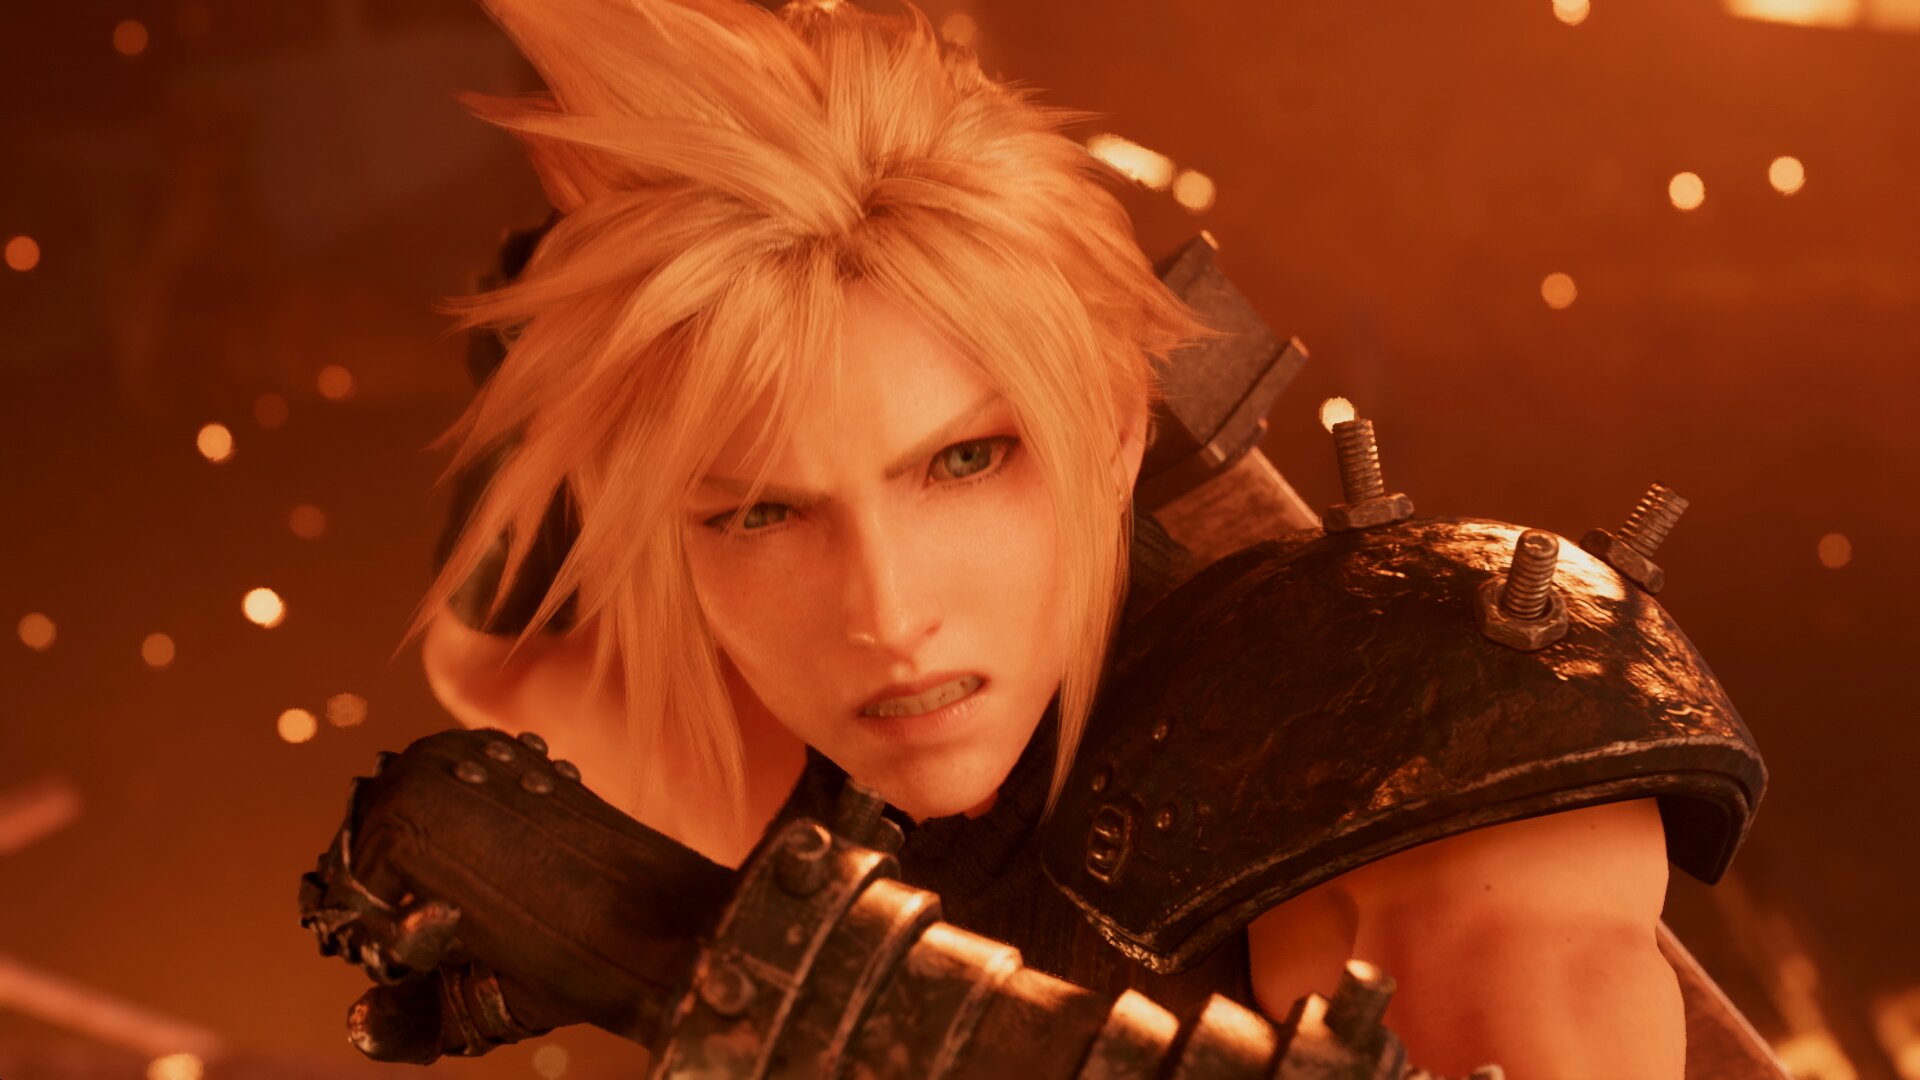 Final Fantasy 7 Remake review: A loving reimagining of the